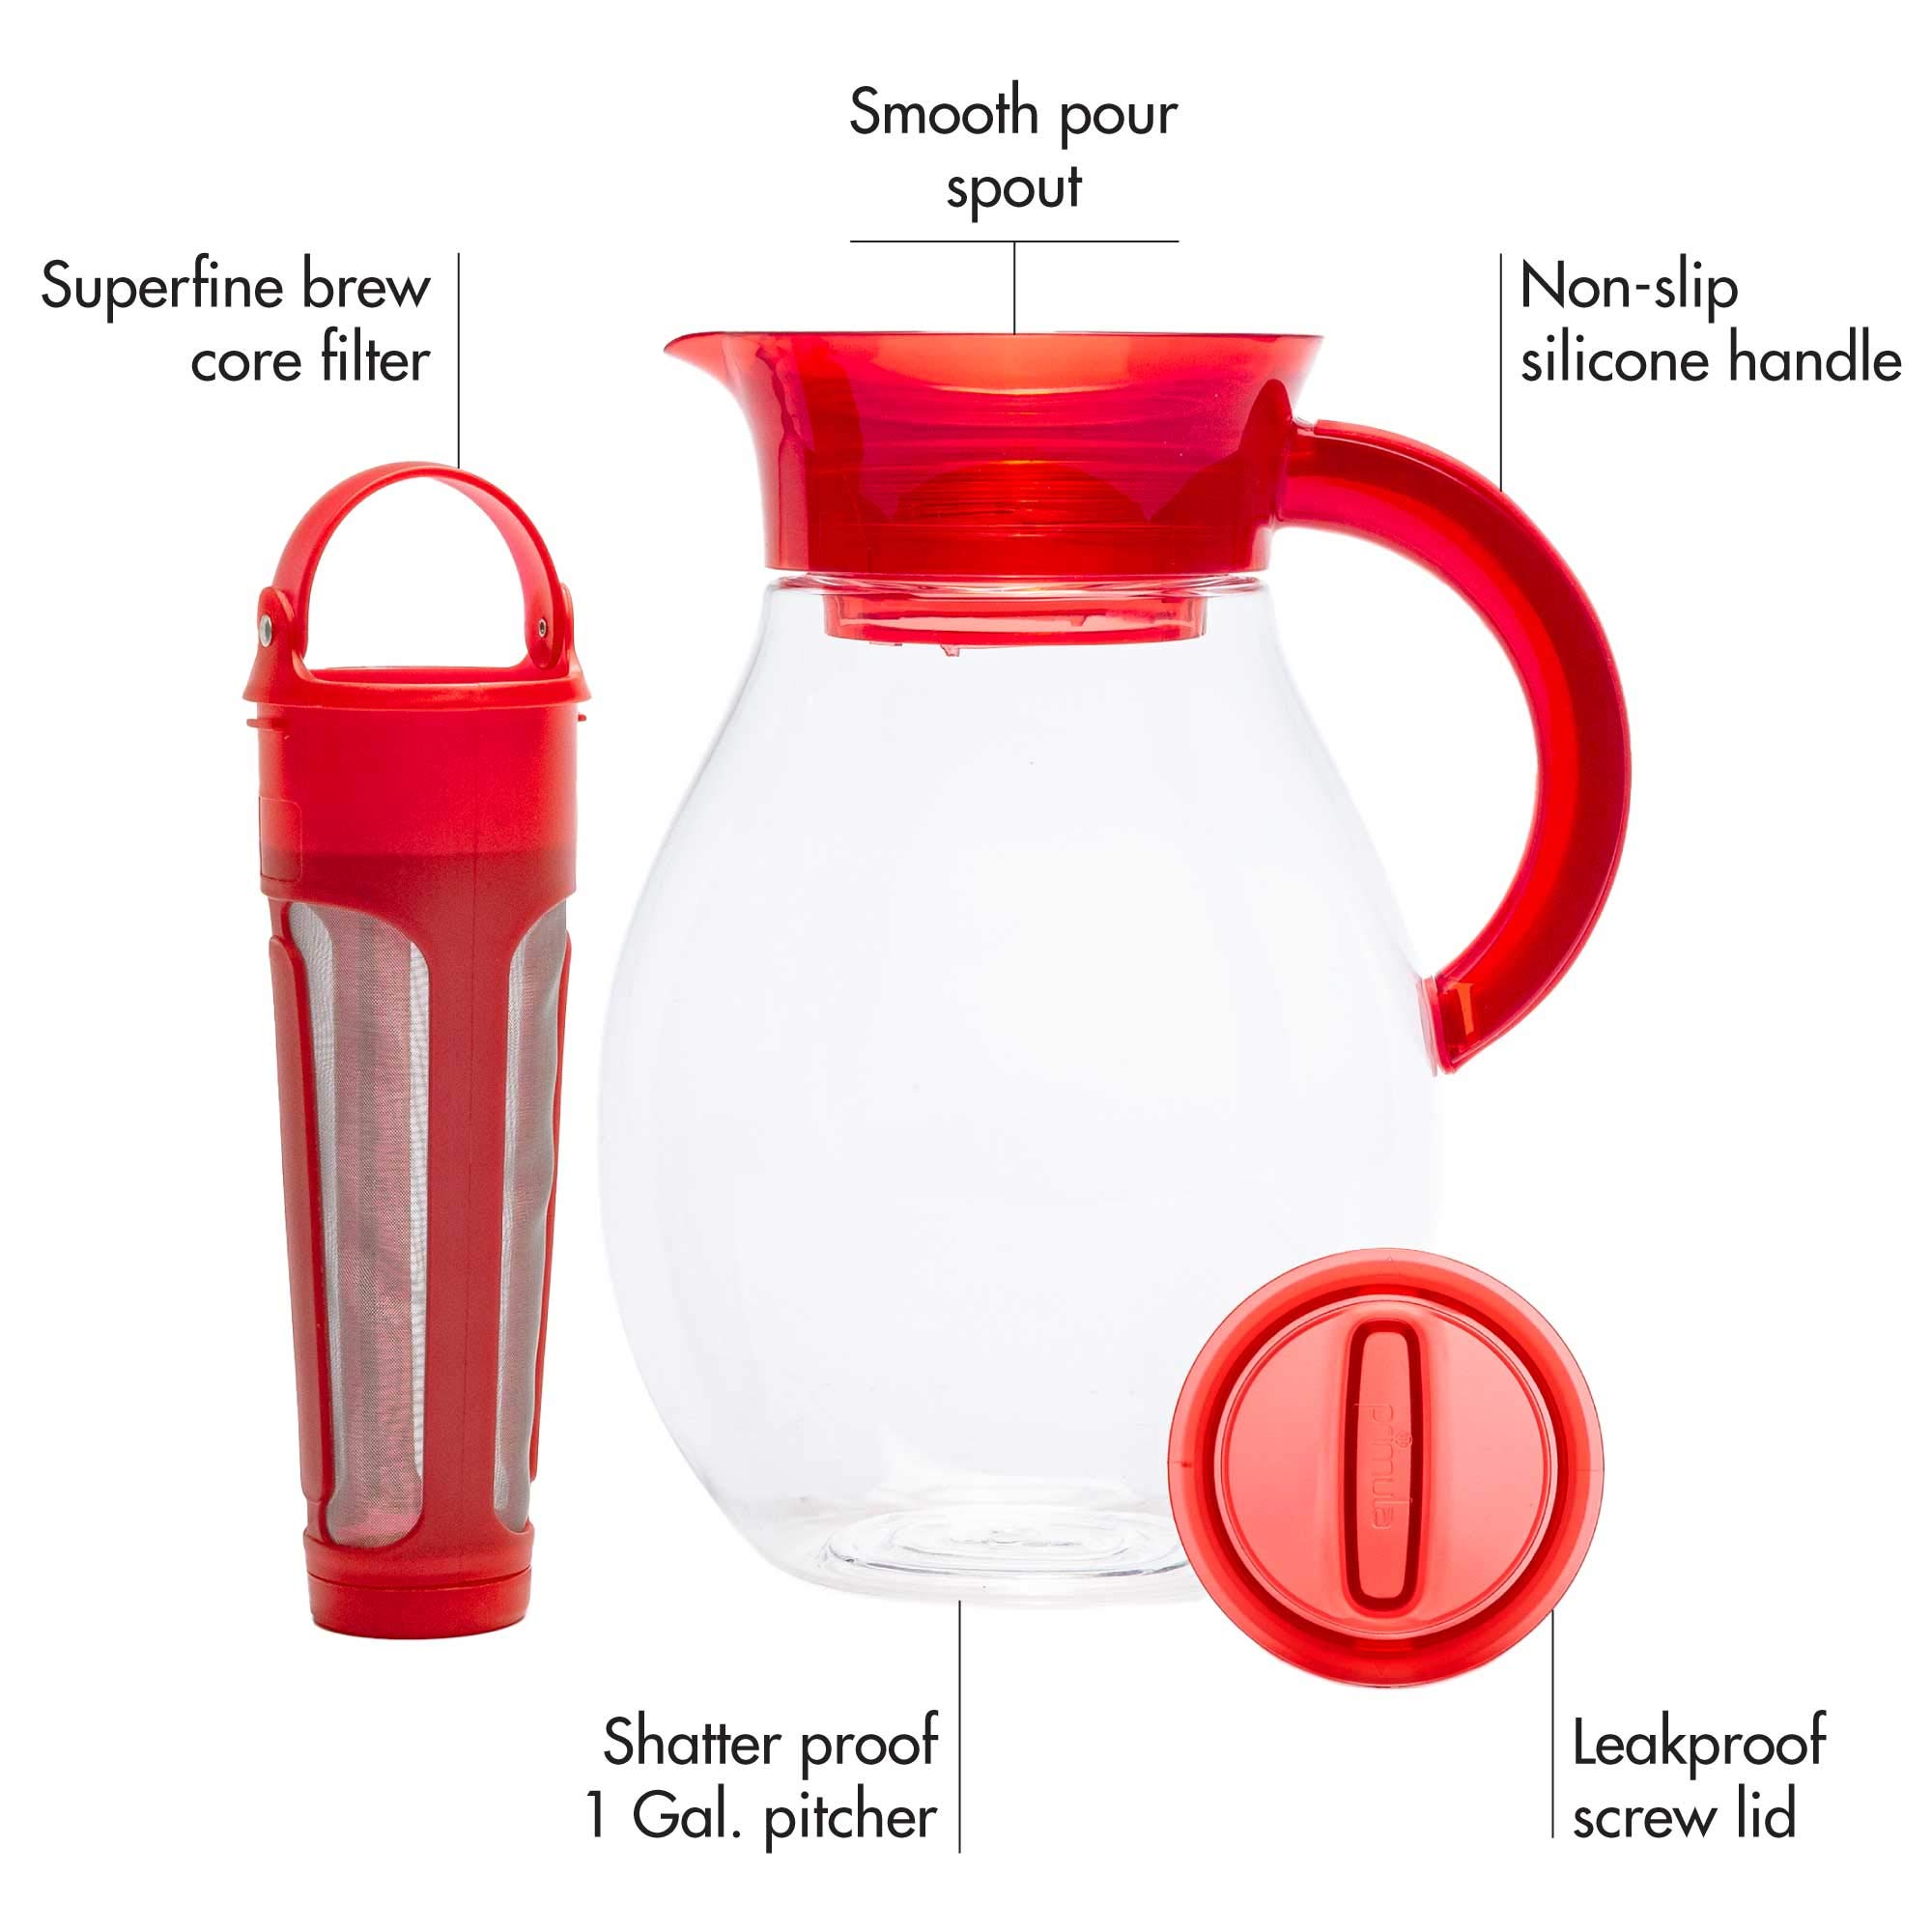 Primula The Big Iced Tea Maker Tritan Plastic Infusion Beverage Pitcher with Leak Proof, Airtight Lid, Fine Mesh Resuable Filter, Manufactured without PFOA, Dishwasher Safe, 1-Gallon, Red